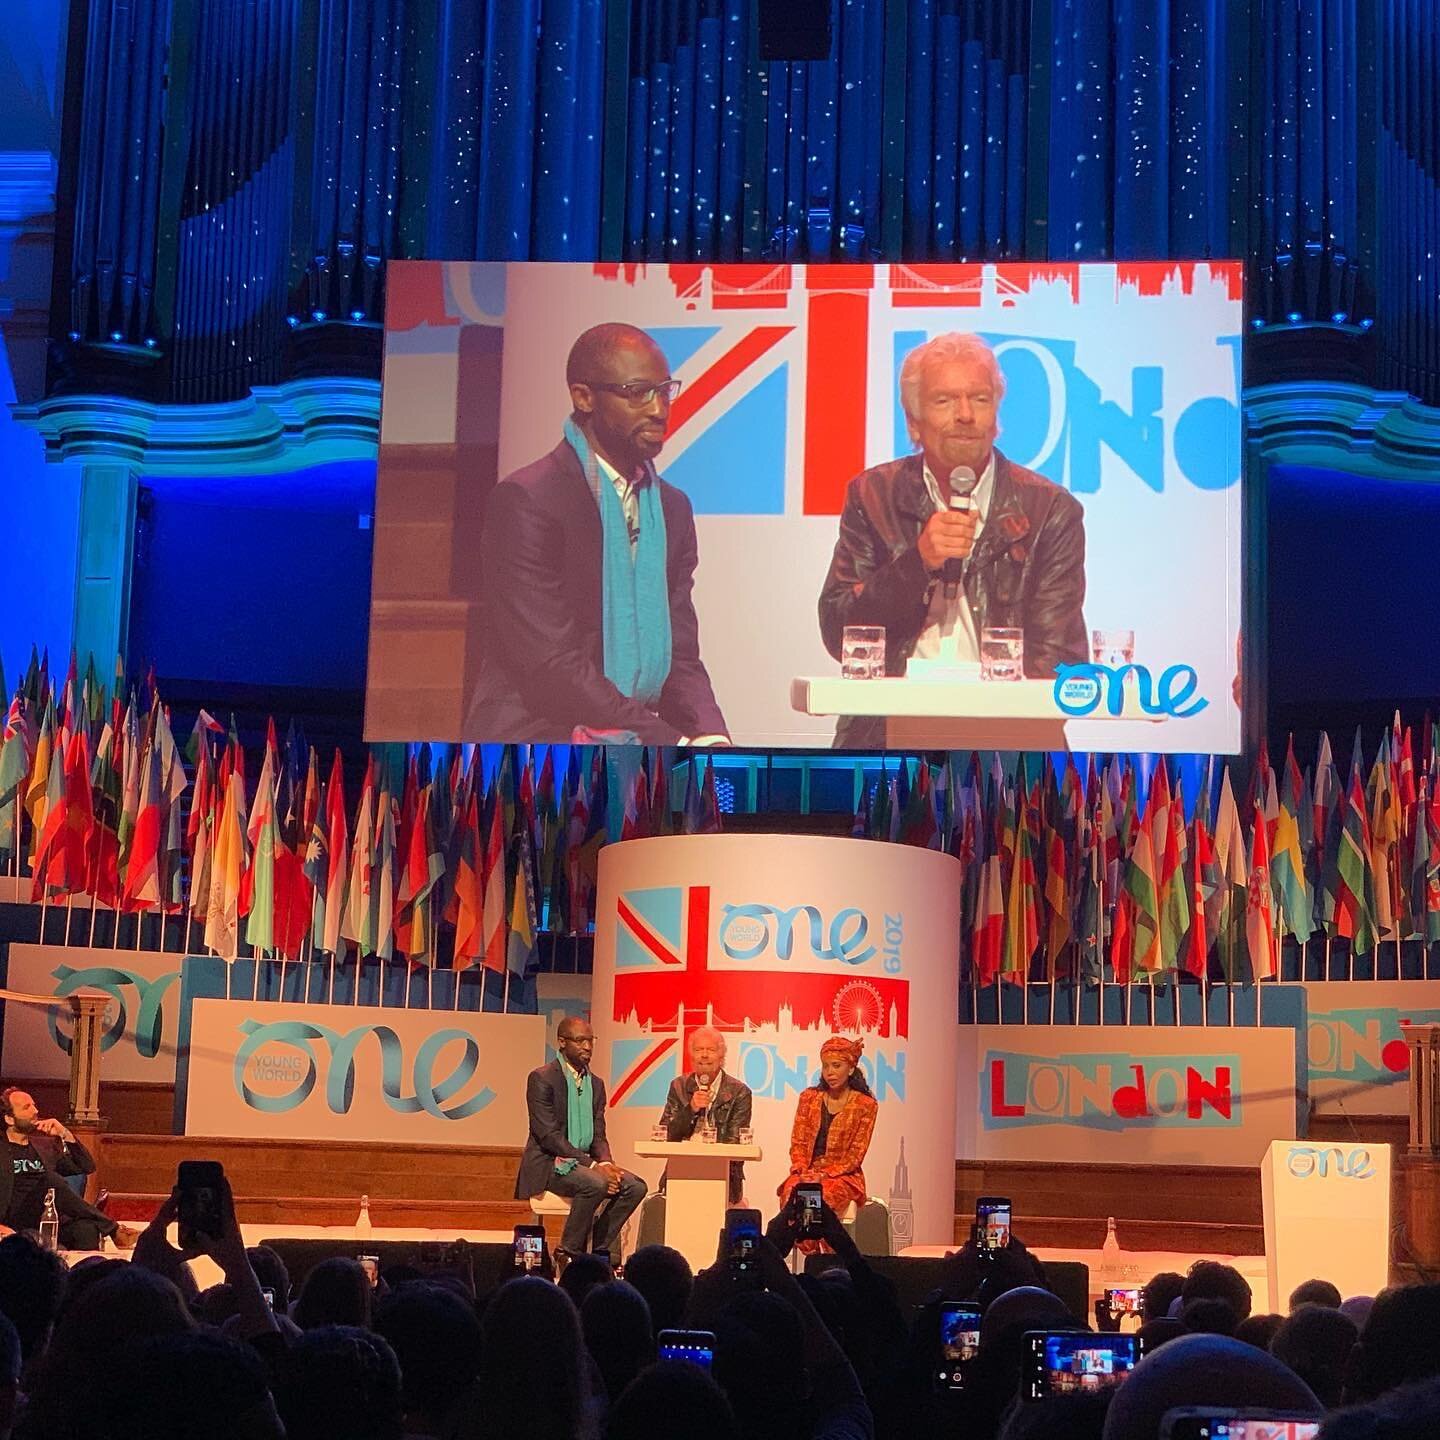 Our multi-cam and live stream production services were put to good use for the Oneworld summit in London in 2019 (back when we were still called little ginger). #oneworld #multicam #events #eventplanning #livestreaming